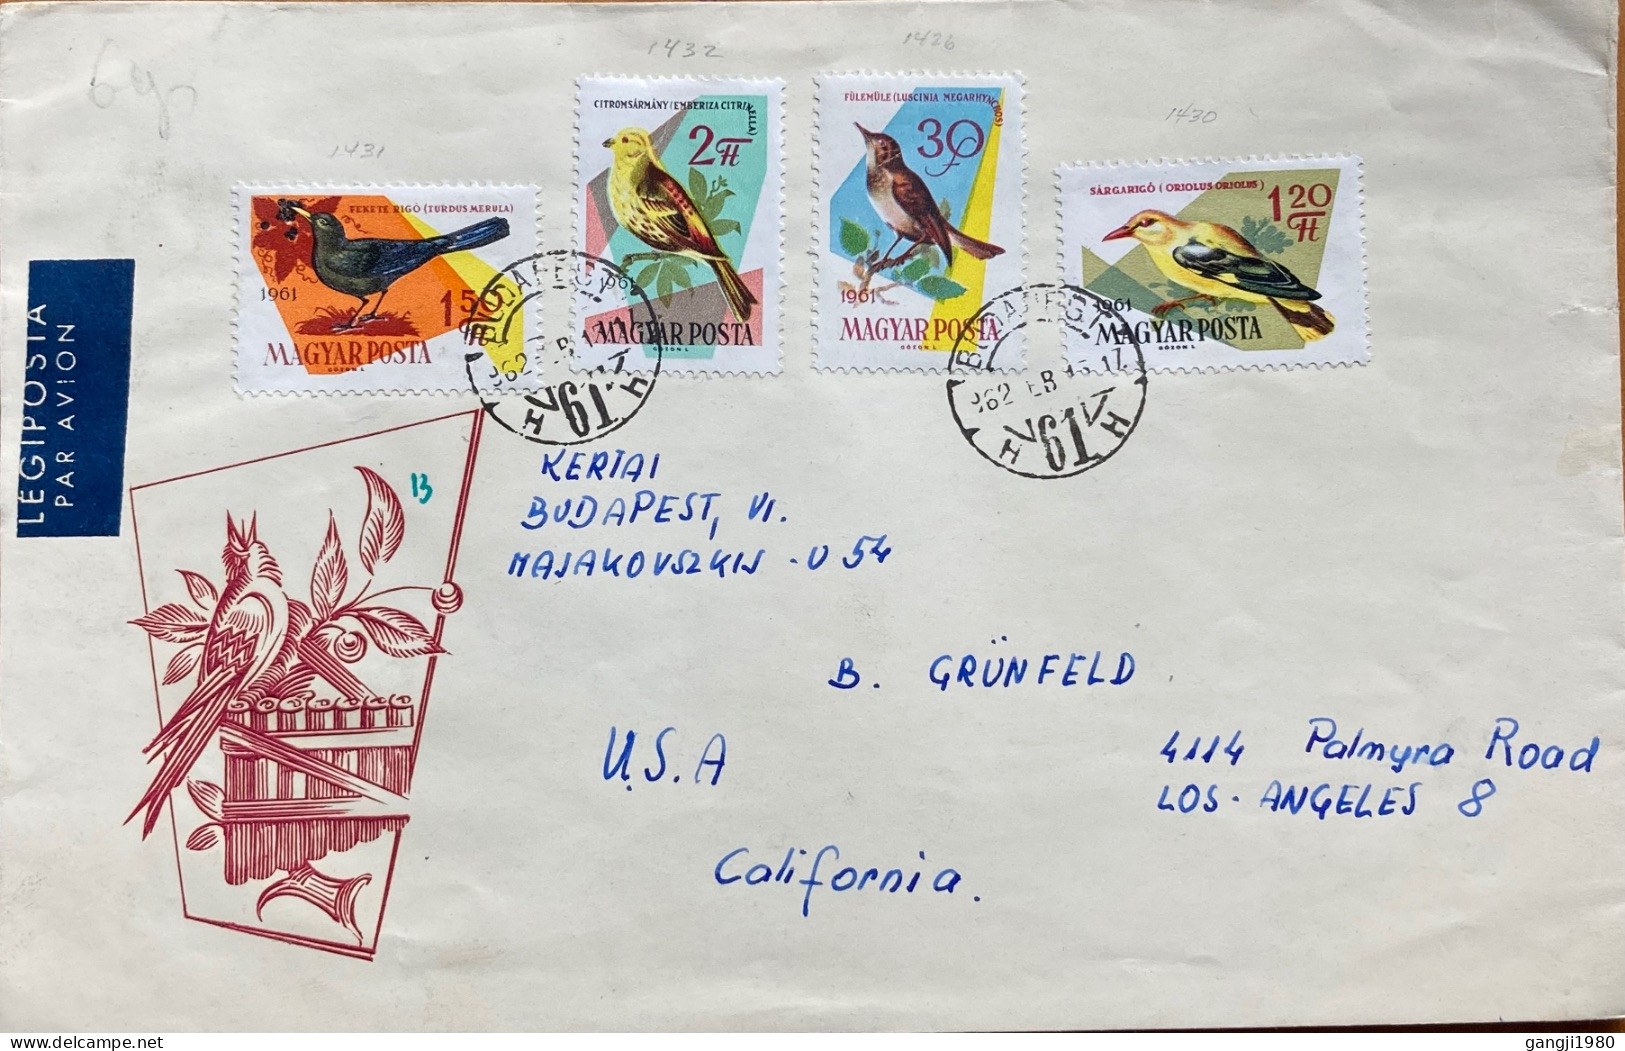 HUNGARY 1968, COVER ILLUSTRATE, AIRMAIL USED TO USA, 4 DIFFERENT BIRD STAMP, BUDAPEST CITY CANCEL. - Brieven En Documenten